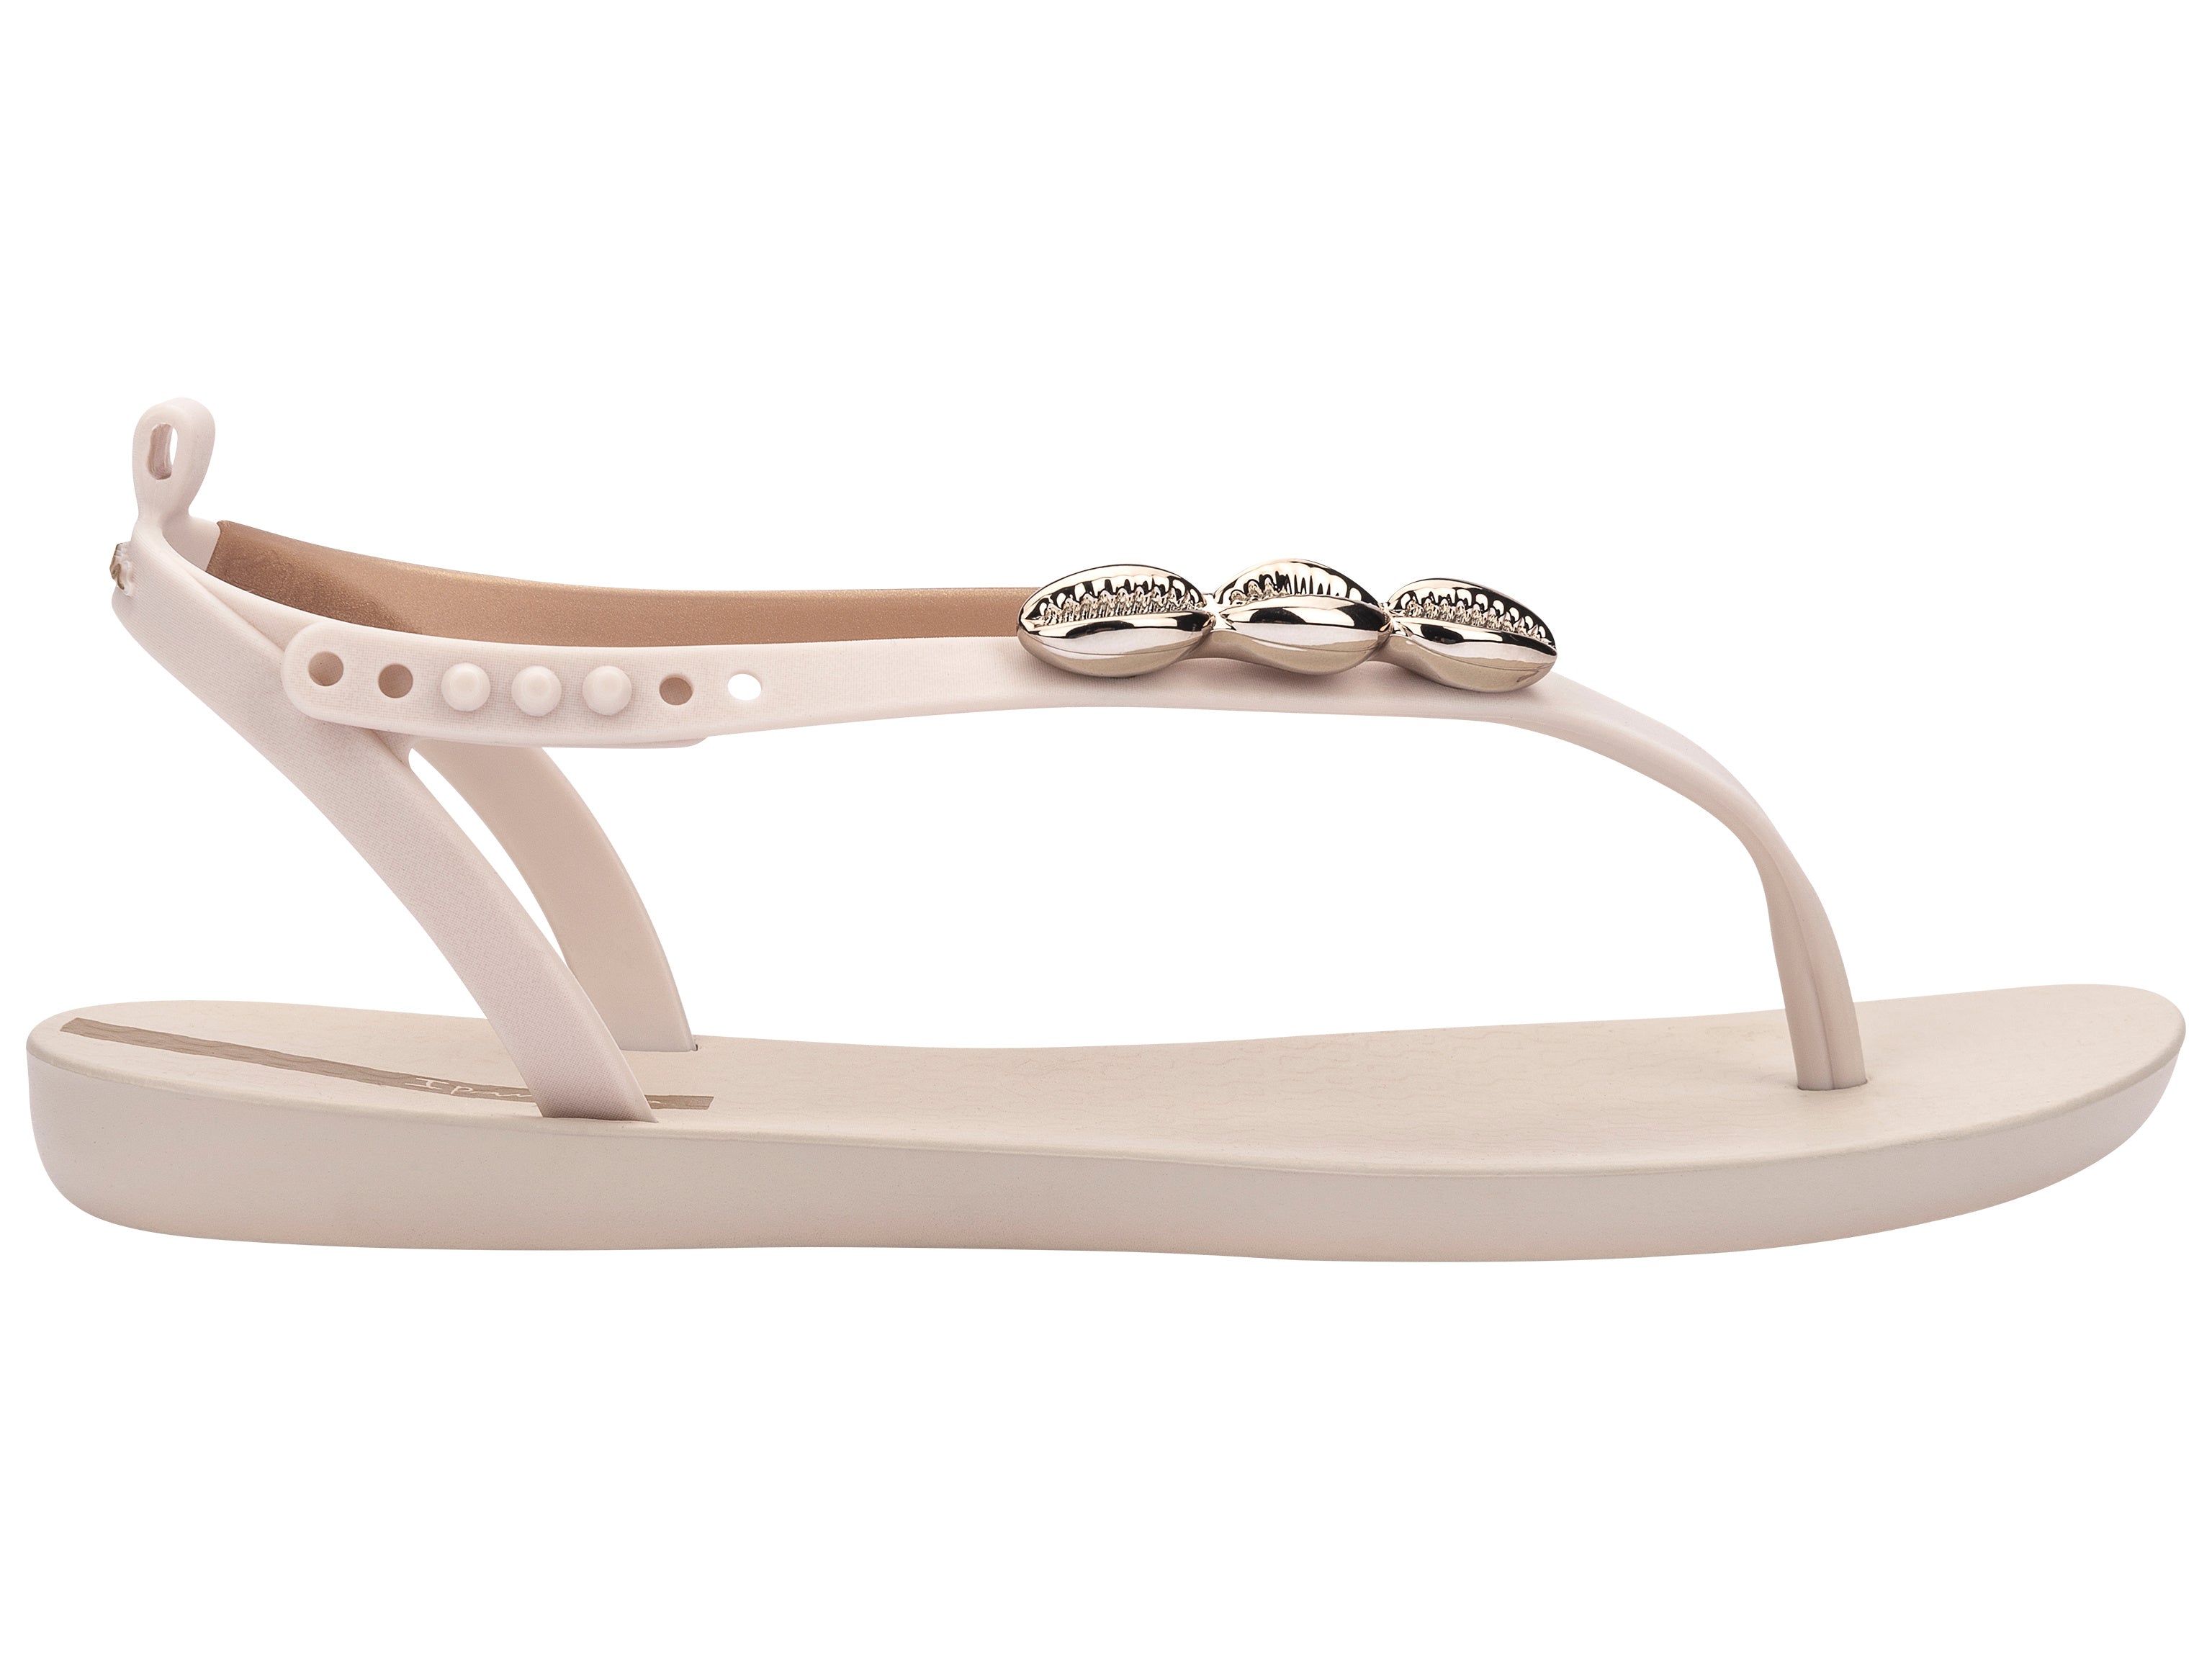 Outer side view of a beige Ipanema Salty women's sandal with 3 gold shells on the strap.